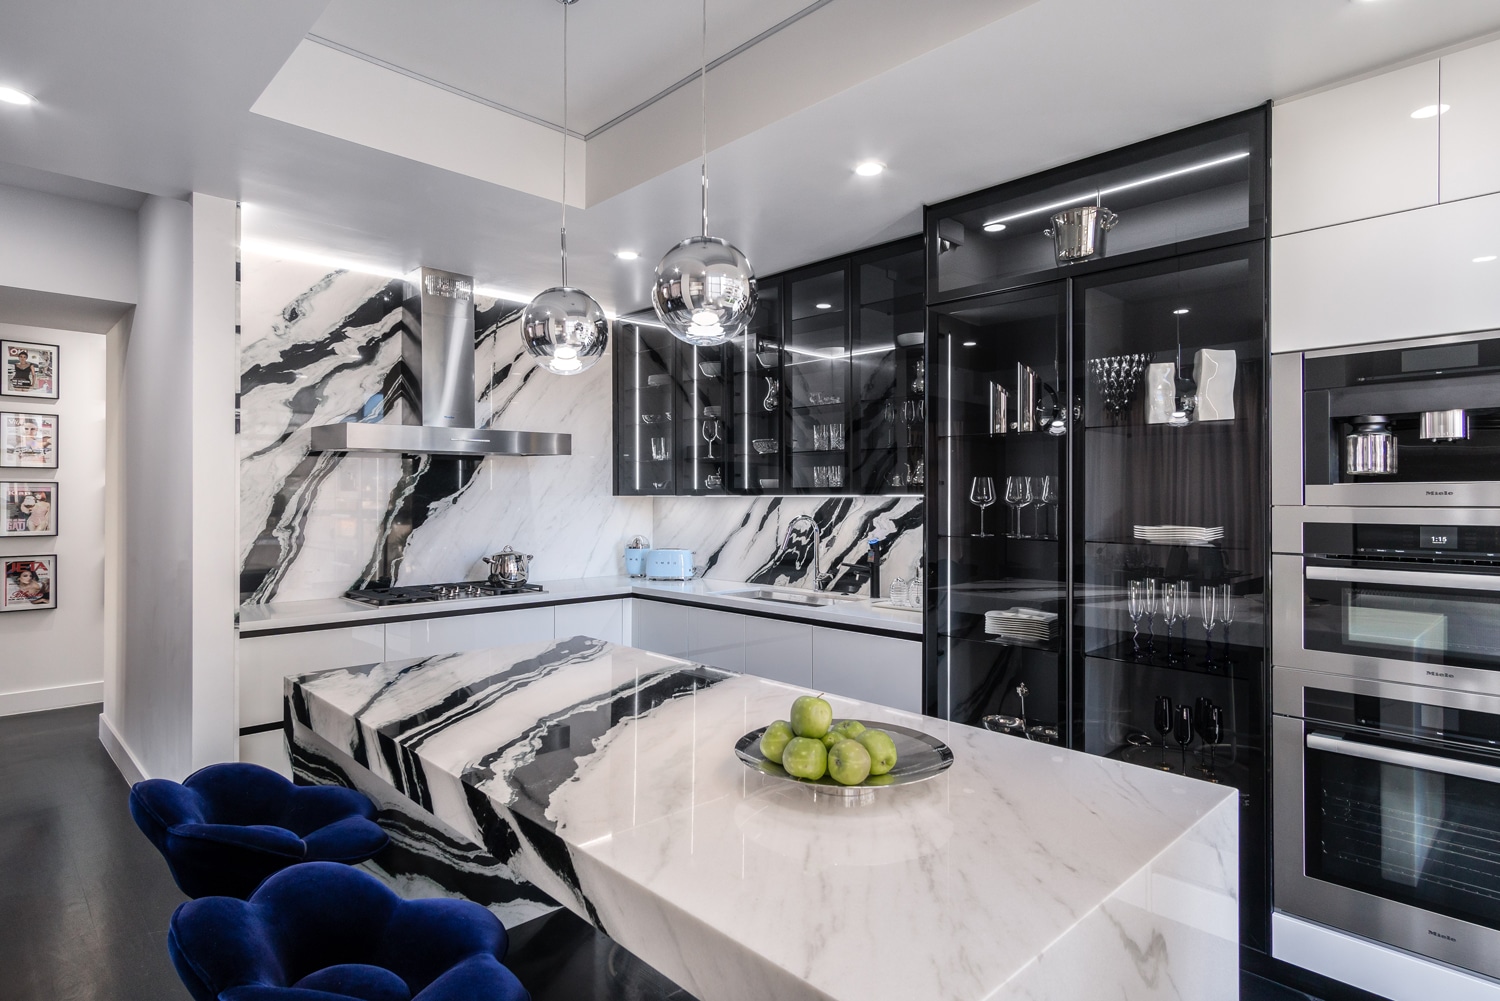 Los Angeles, CA. MandiCasa’s YOTA cabinetry in White Glossy Lacquer and Nero Groove Glossy Lacquer finishes. State-of-the-art appliances from Subzero and Miele. Senior Designer Consultant of MandiCasa Los Angeles, Reba Sams.
